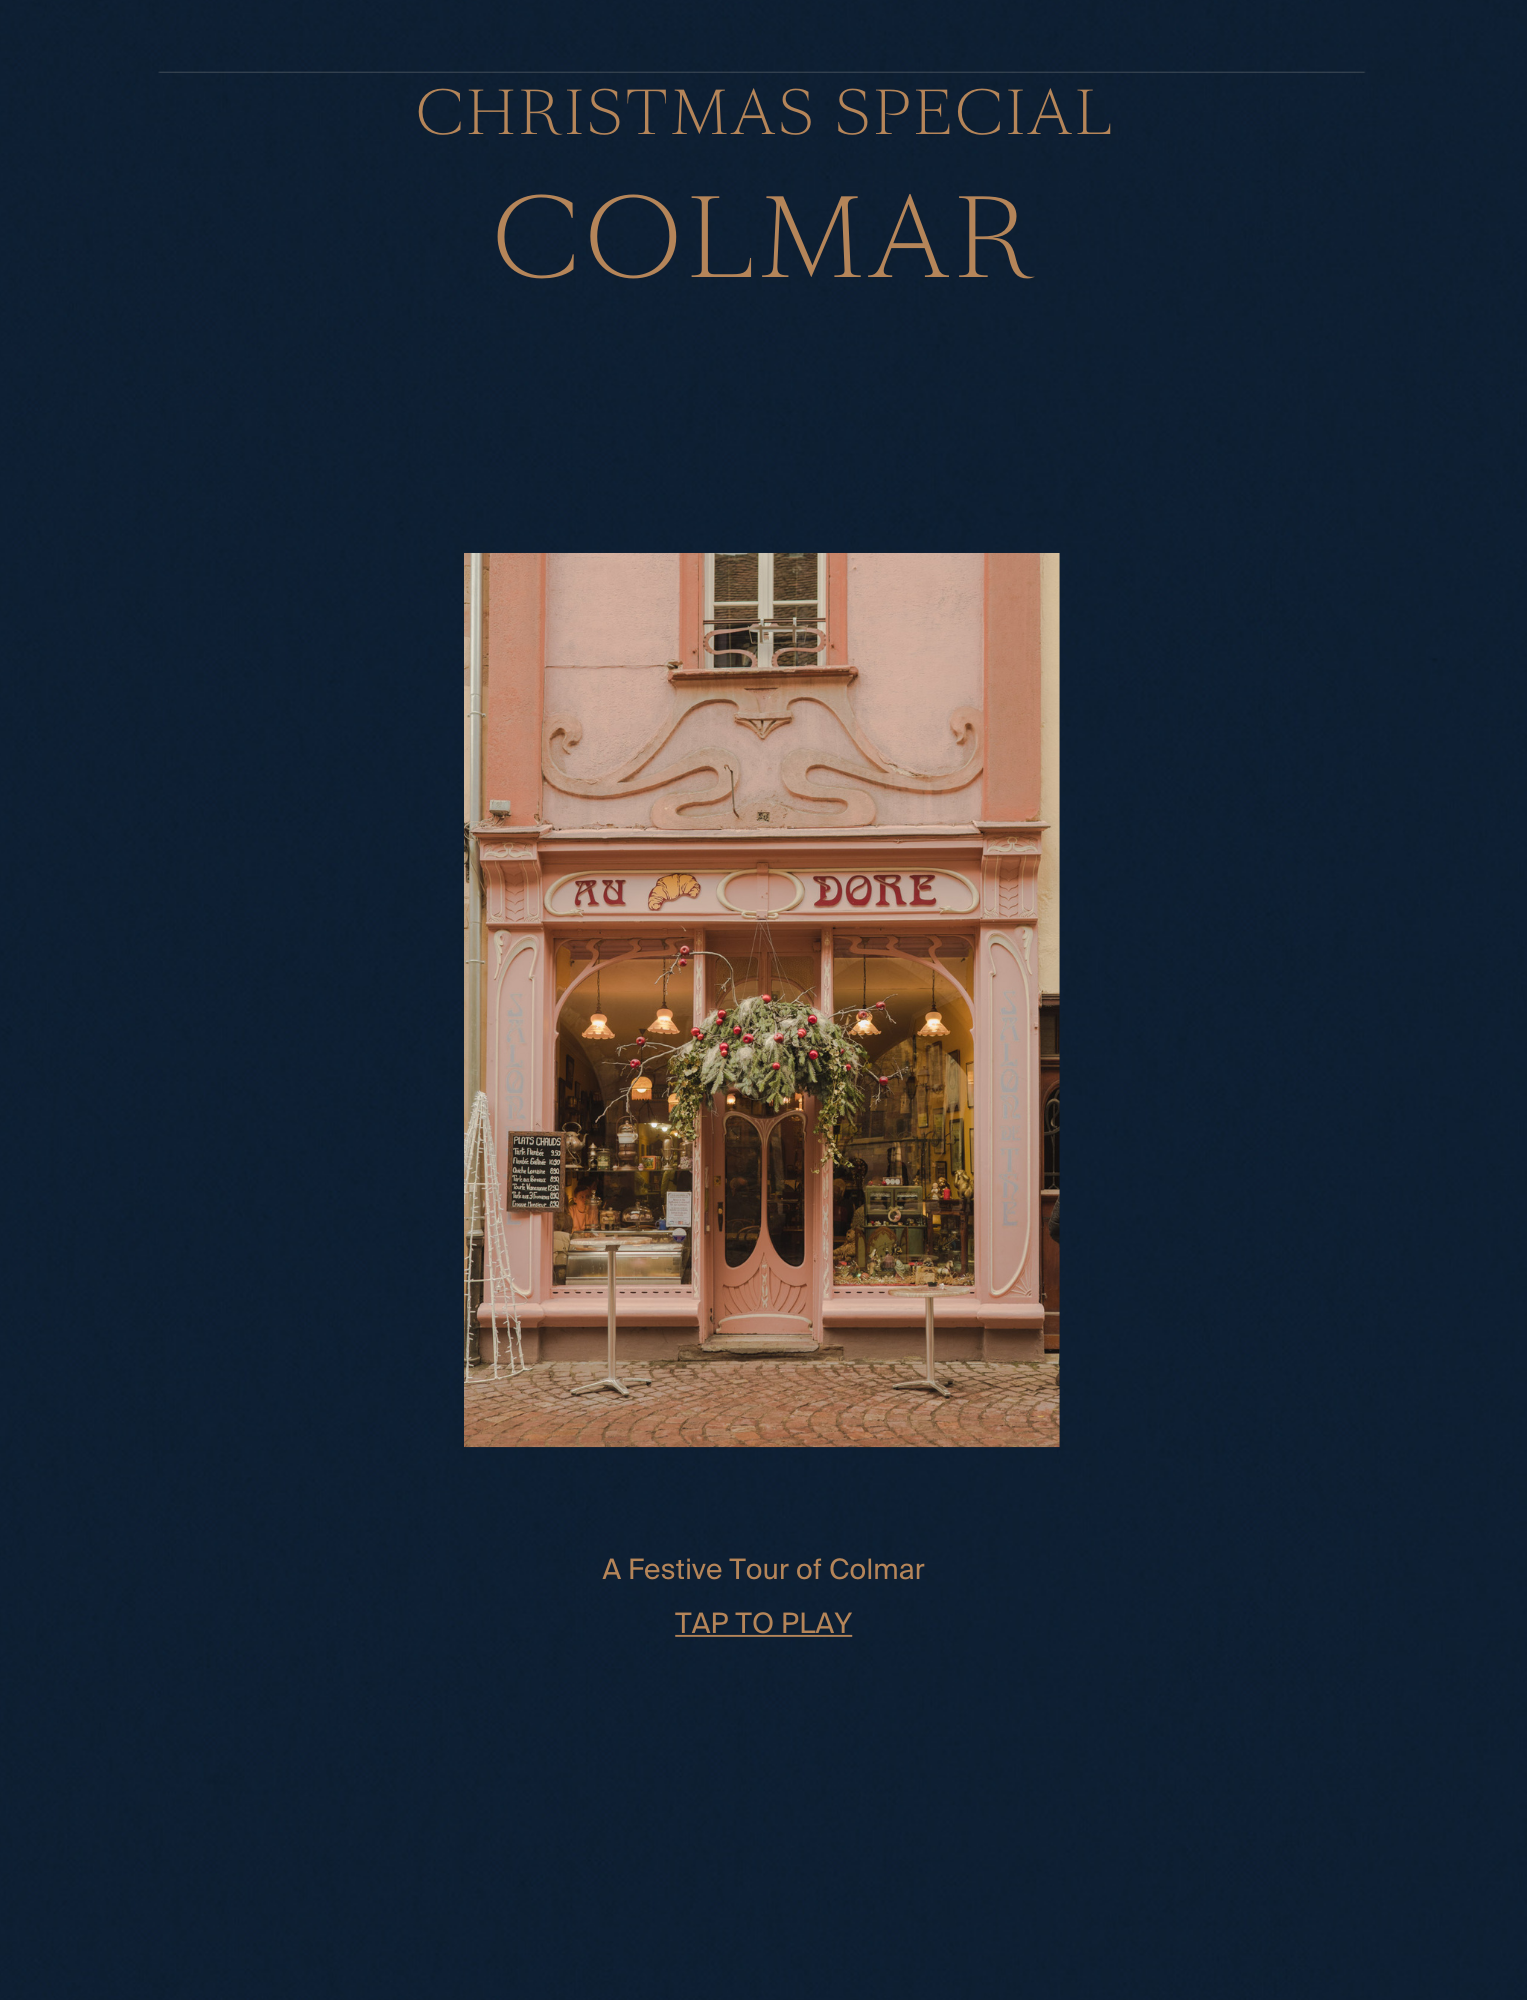 A Guide to Alsace, Christmas Edition - the cover page for Colmar, by Simply Slow Traveler